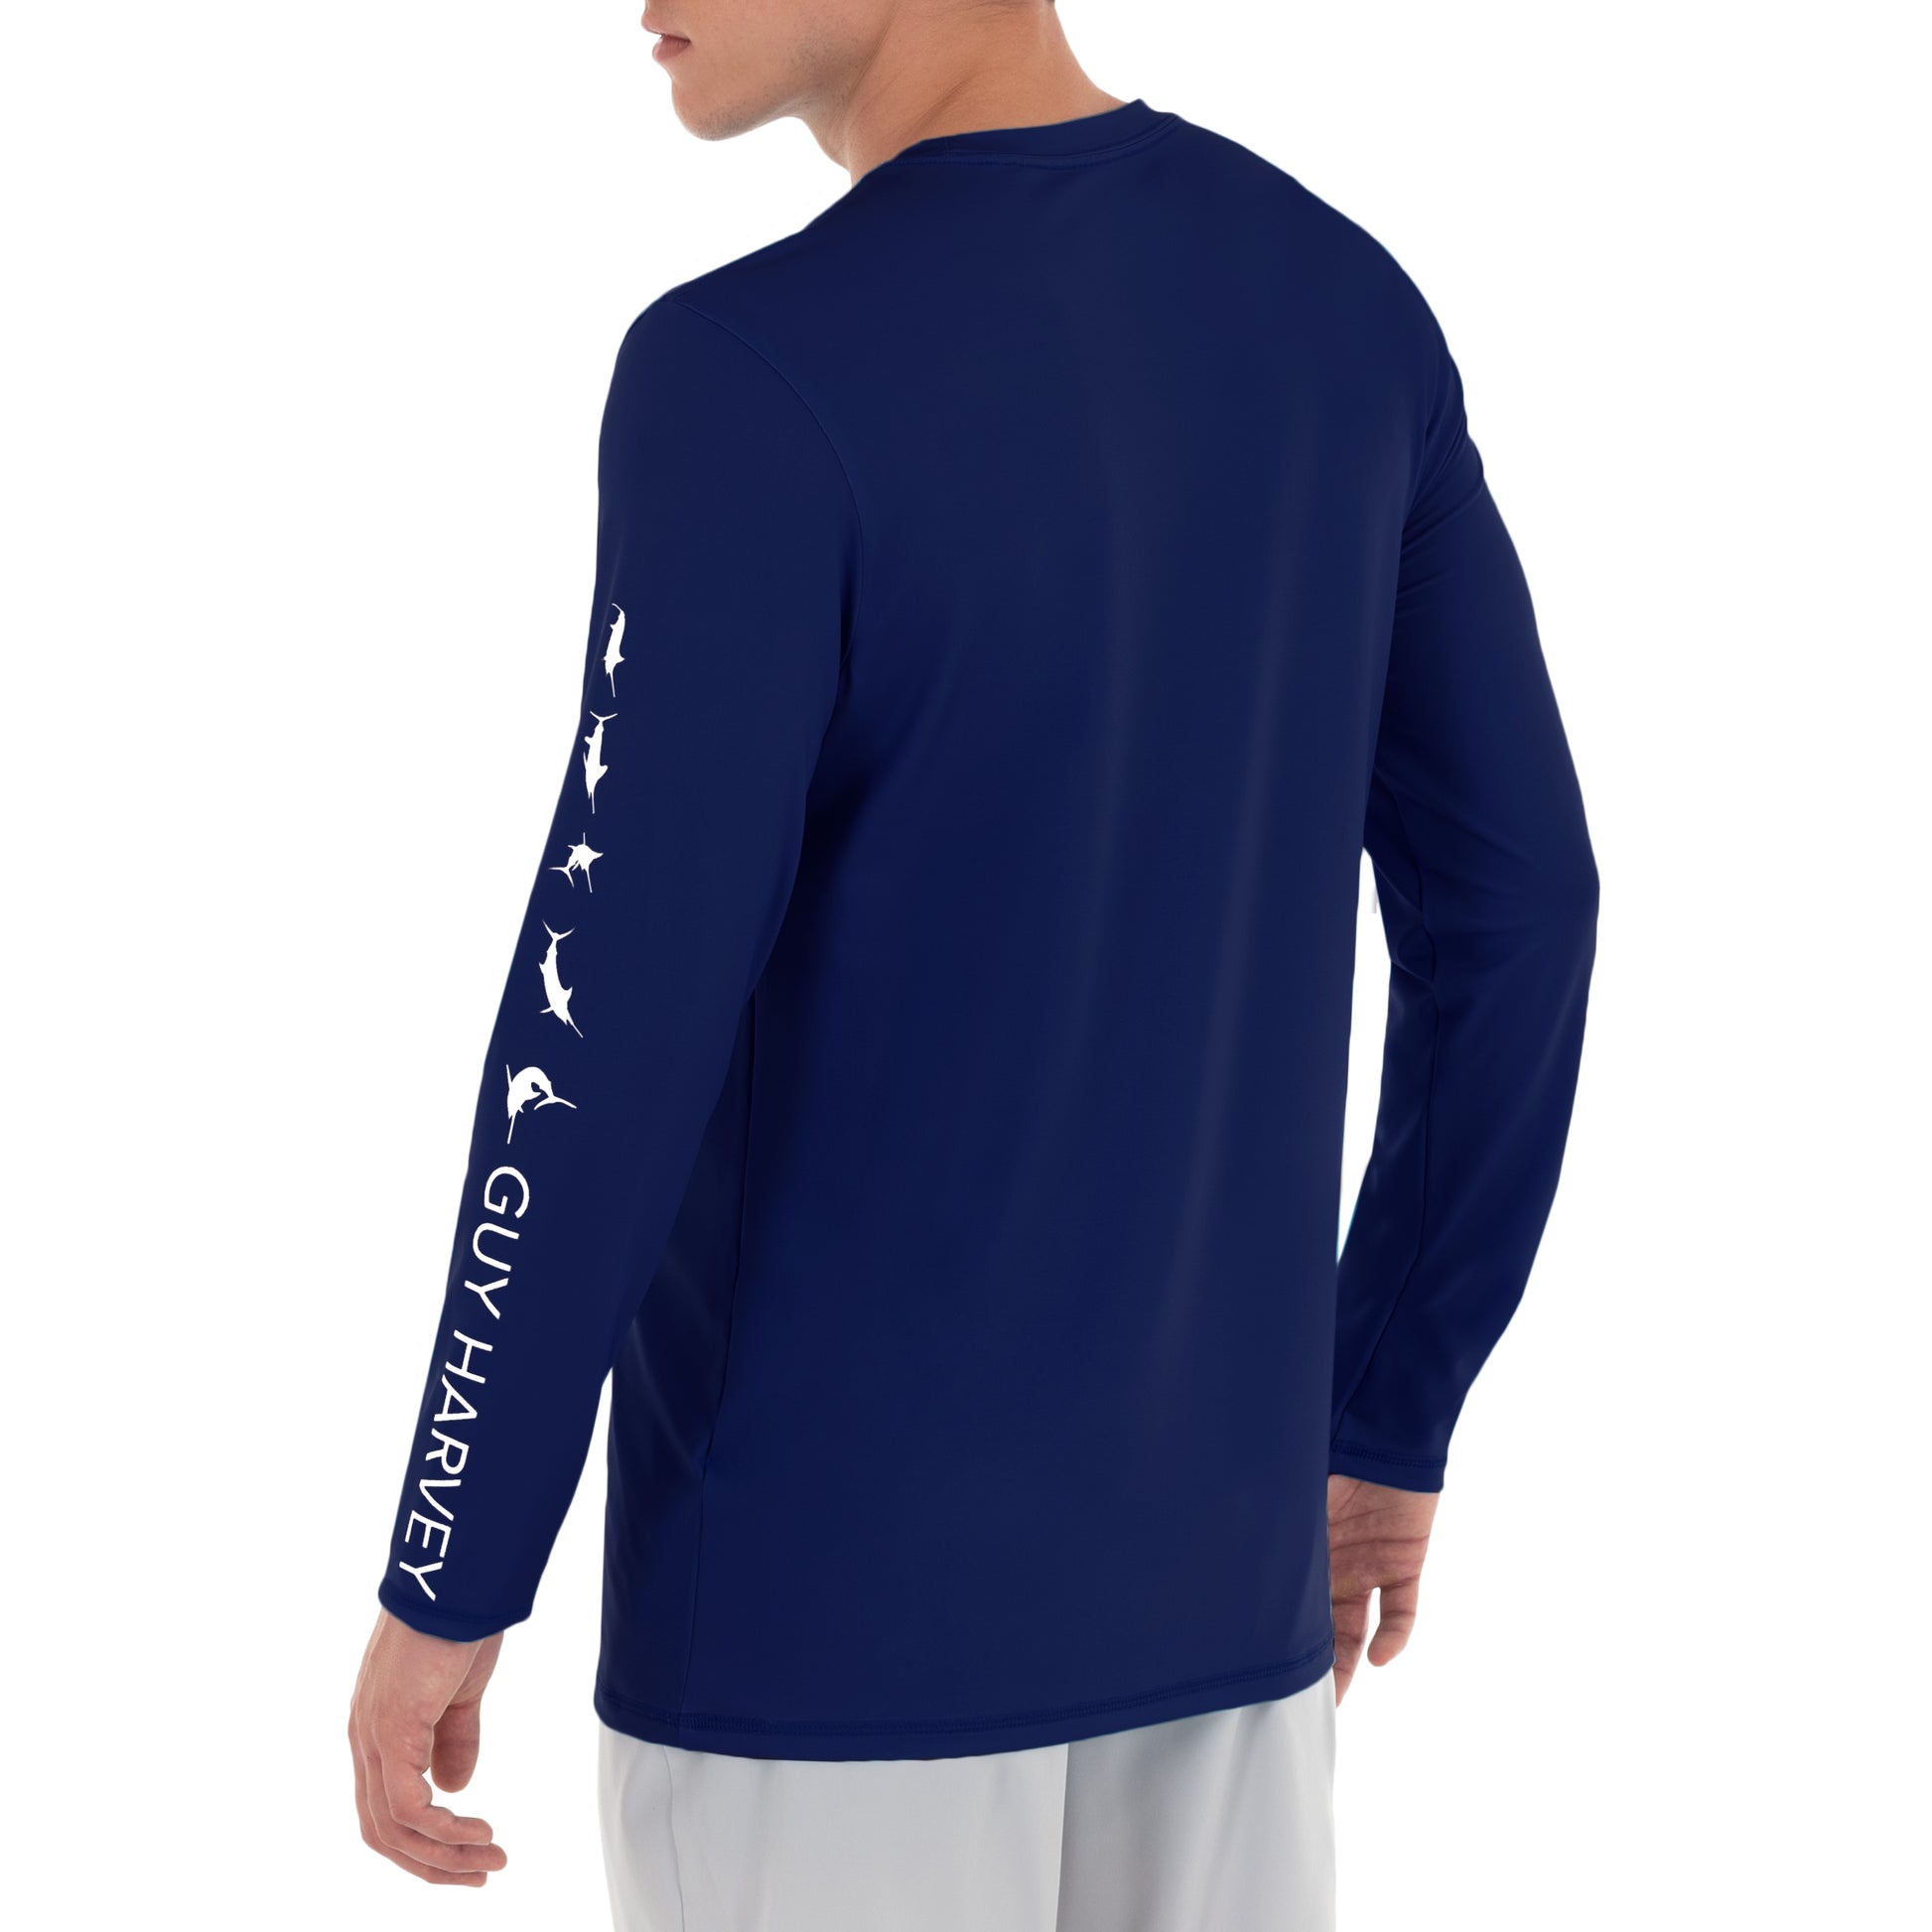 Men's Core Solid Long Sleeve Sun Protection Navy Shirt